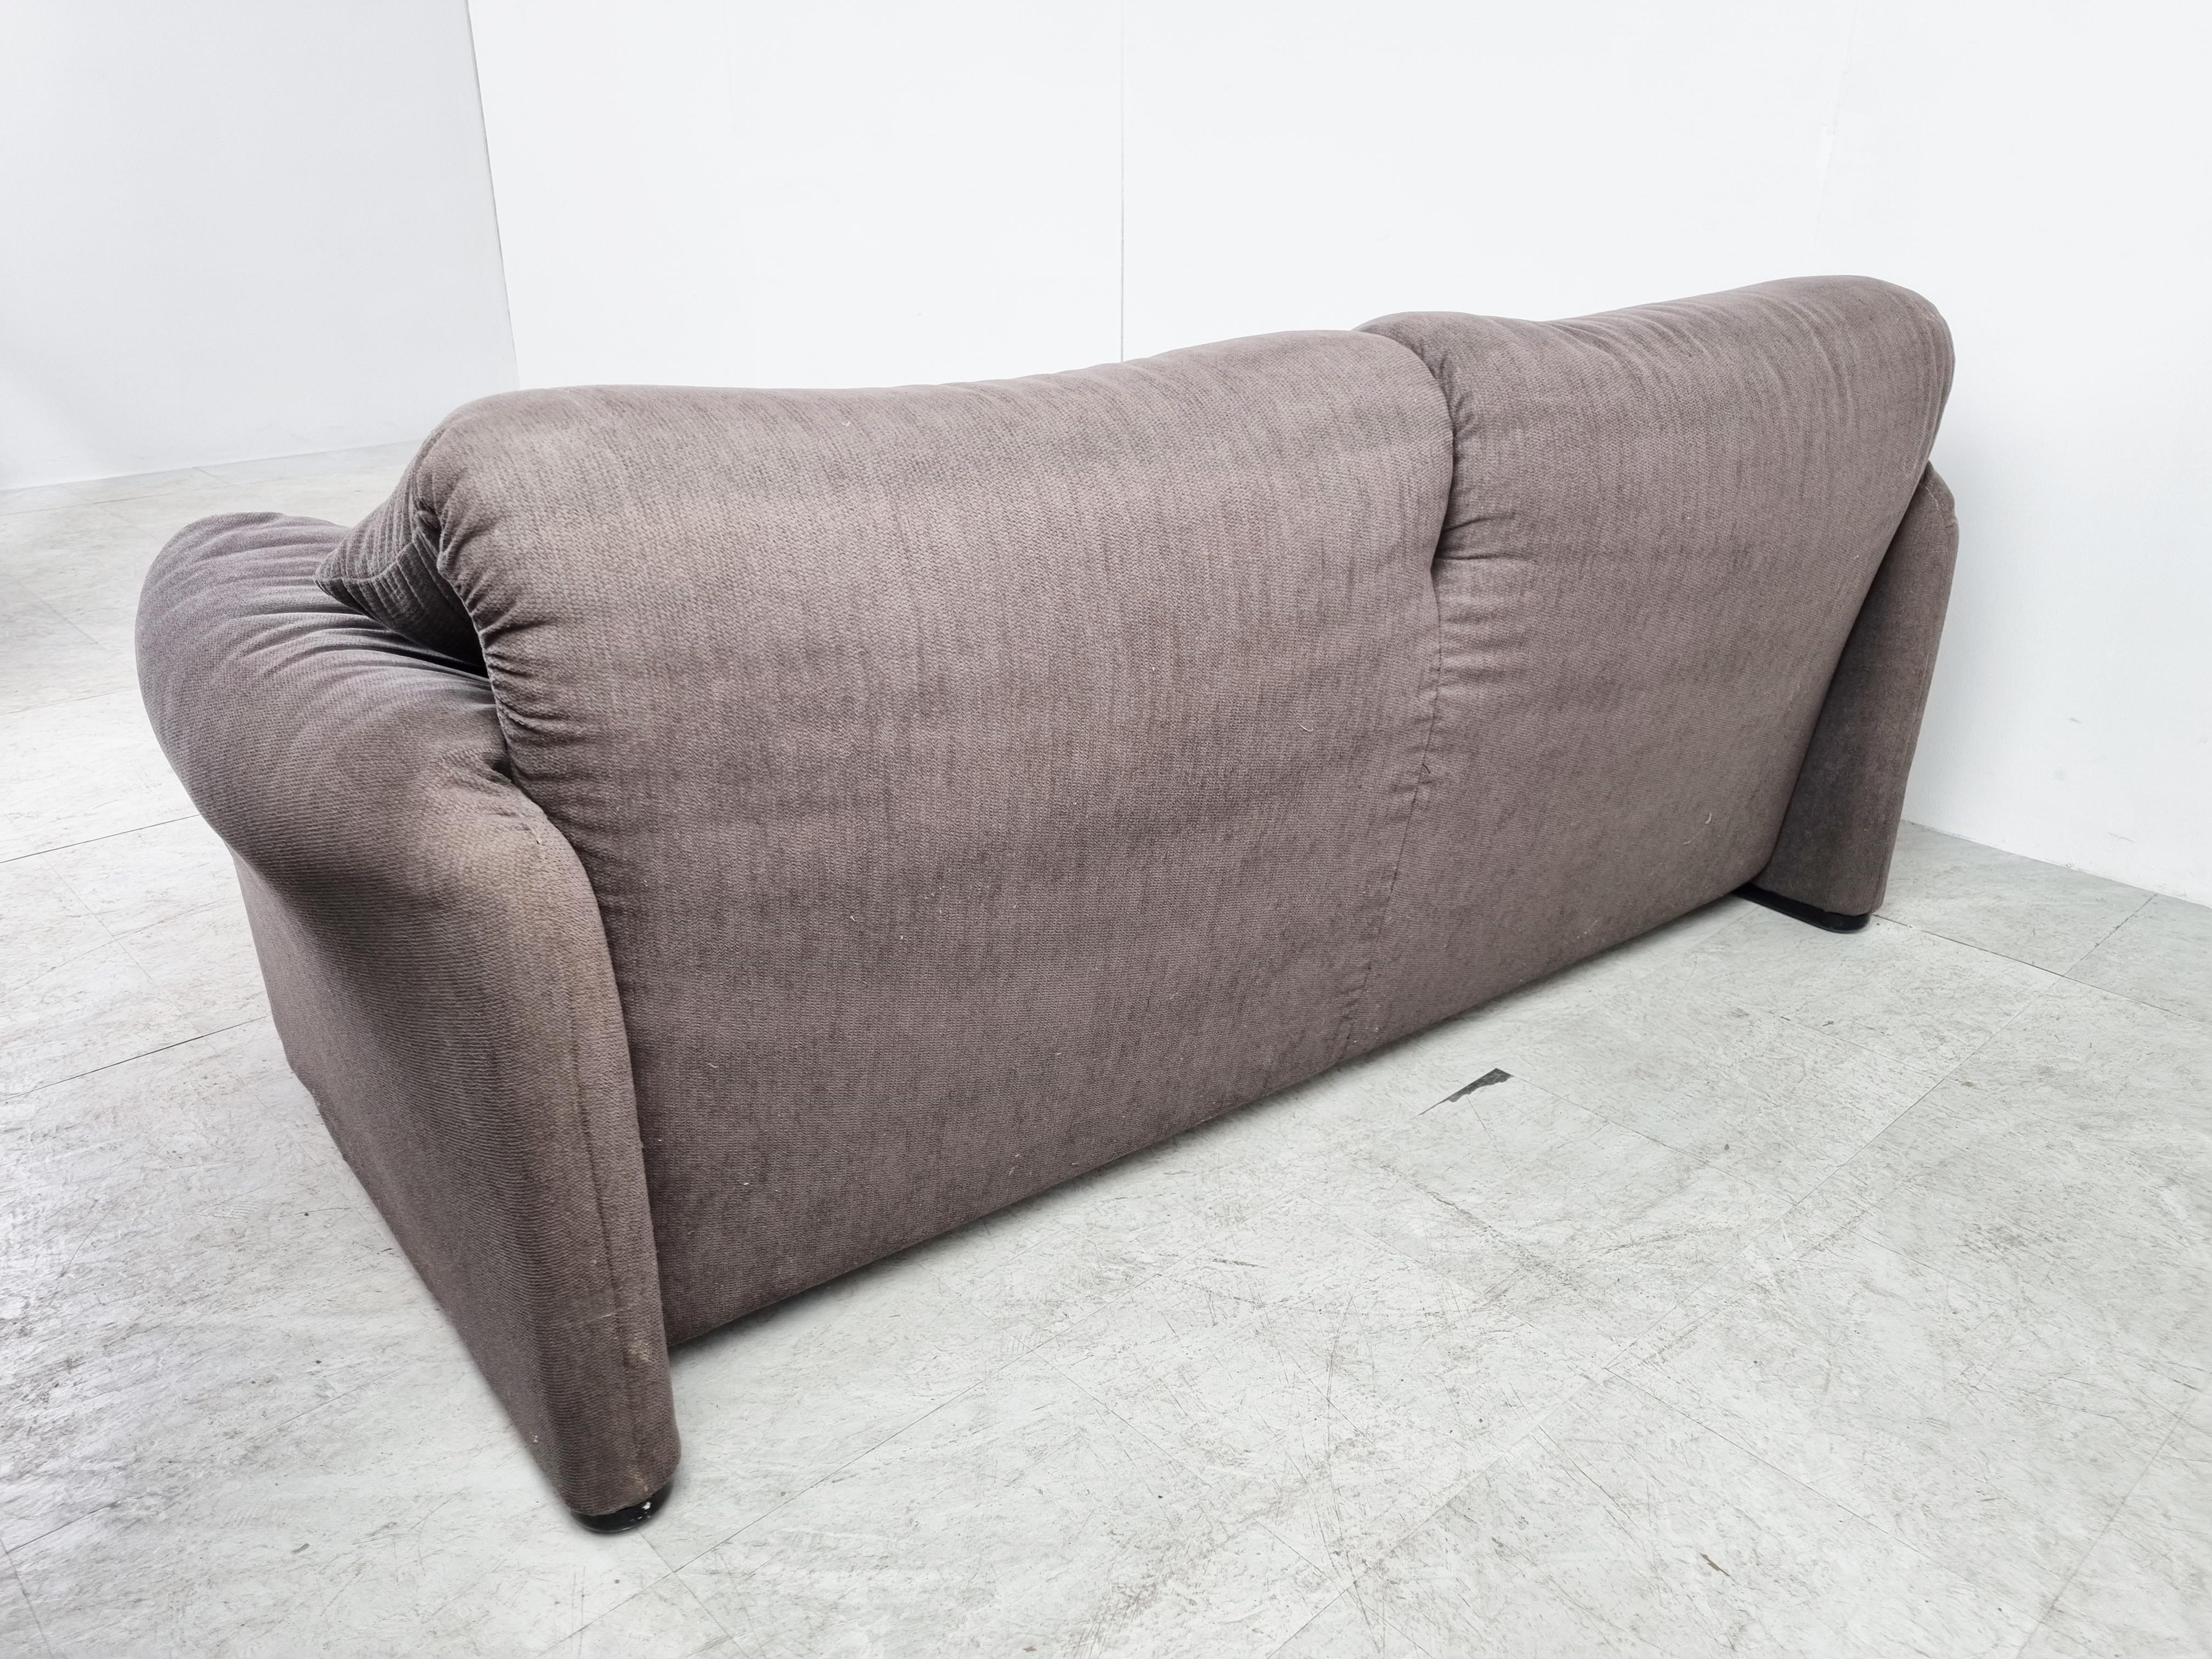 Vintage maralunga sofa designed by Vico Magistretti for Cassina in 1973.

This iconic design sofa is upholstered in a grey upholstery.

The backrests are adjustable.

Labeled.

Good overall condition

1980s- Italy

Dimensions
H 28 in. x